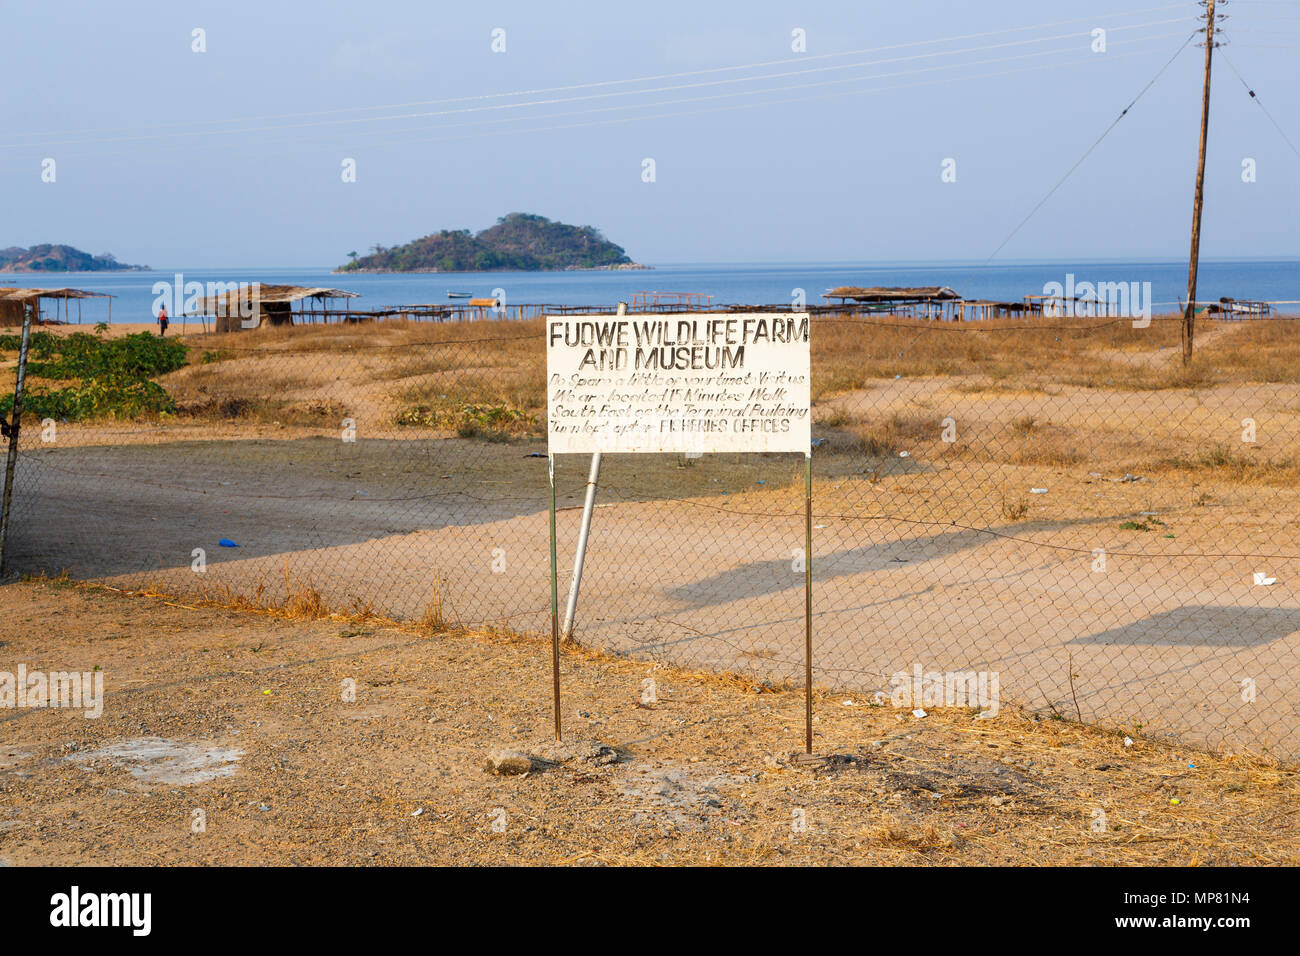 Sign for Fudwe Wildlife Farm and Museum, alocal attraction and place of interest on the coast of Likoma Island, Lake Malawi, Malawi, south-east Africa Stock Photo